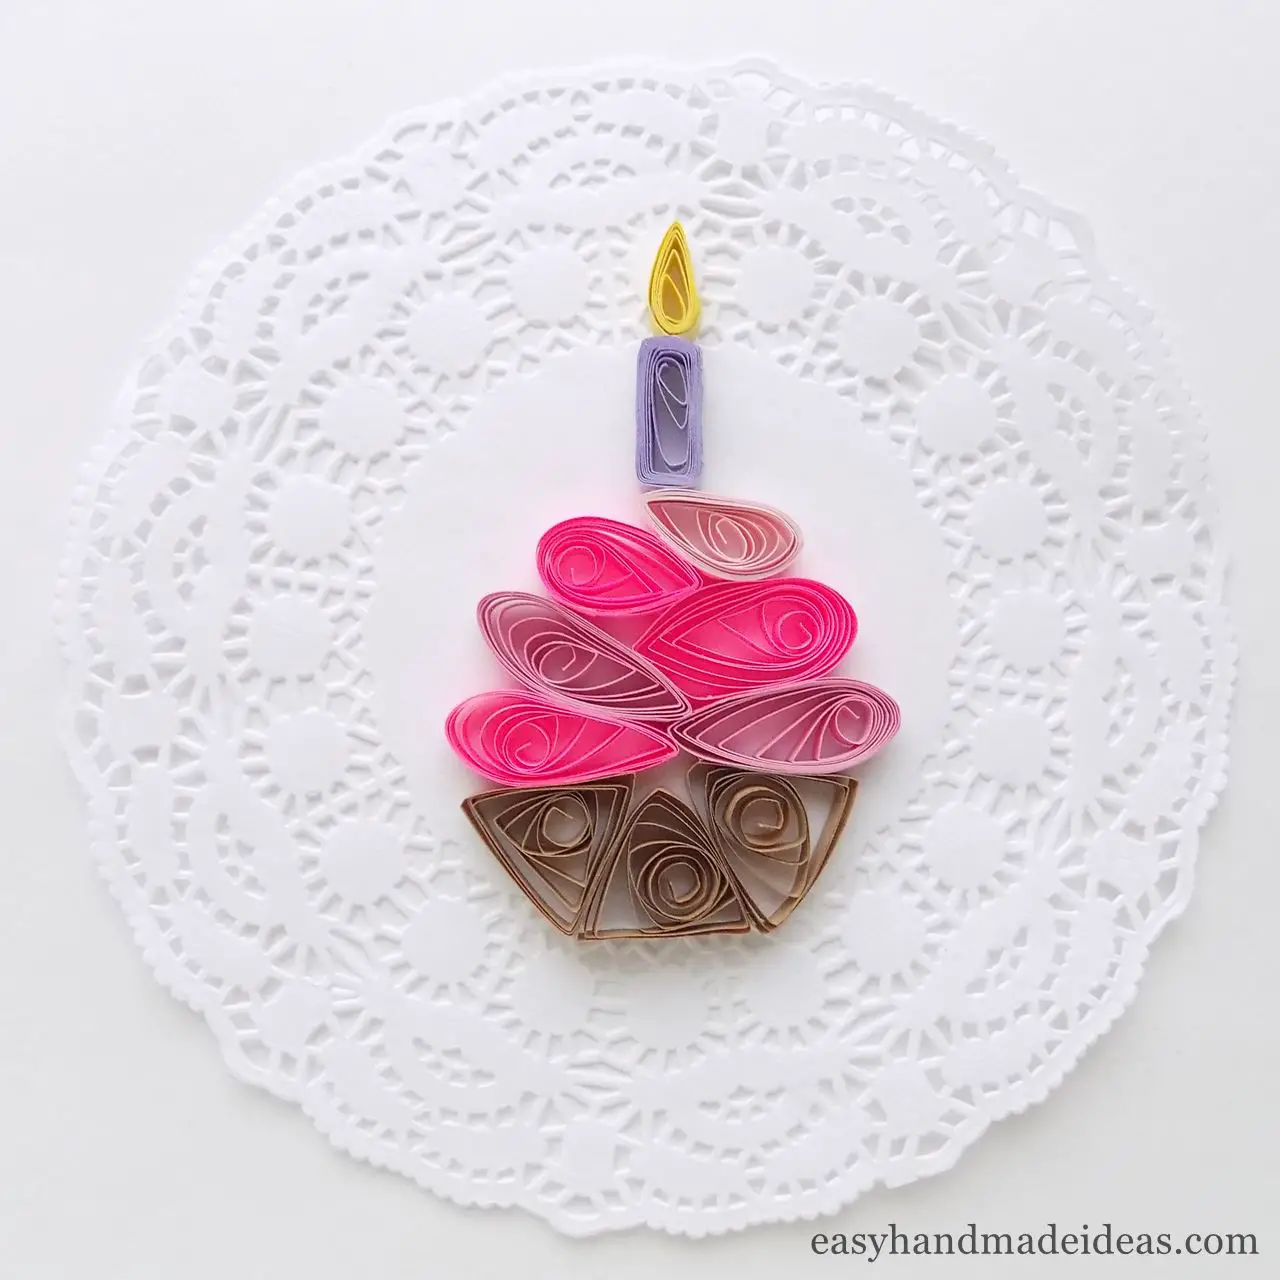 Quilled cake